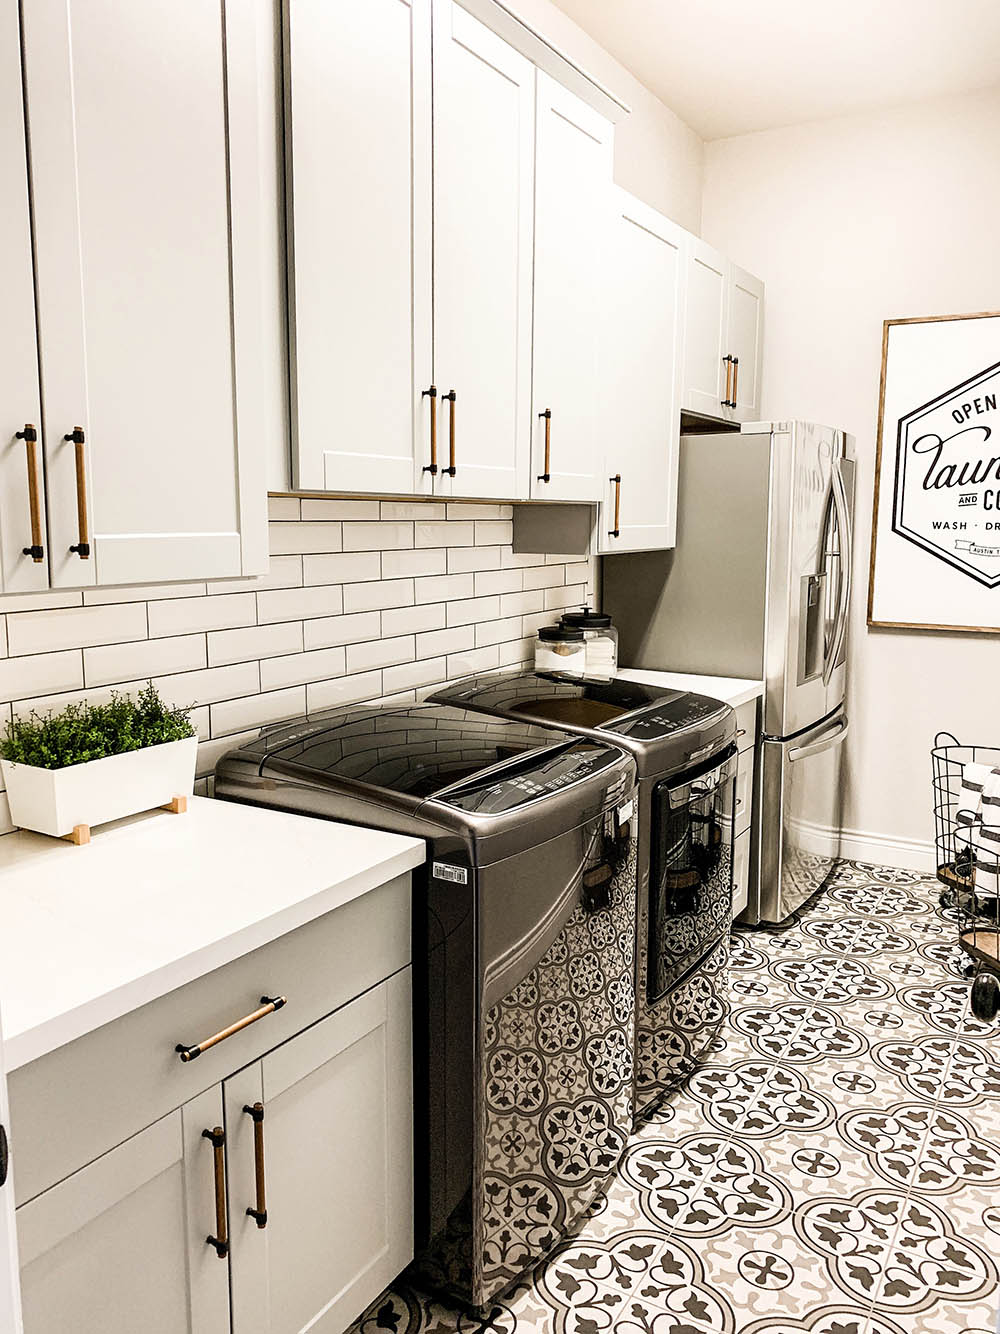 Laundry room with mosaic tiled flooring, black washer and dryer, upper and lower grey cabinets with gold hardware, subway tiled wall, wall art, and a refrigerator. 